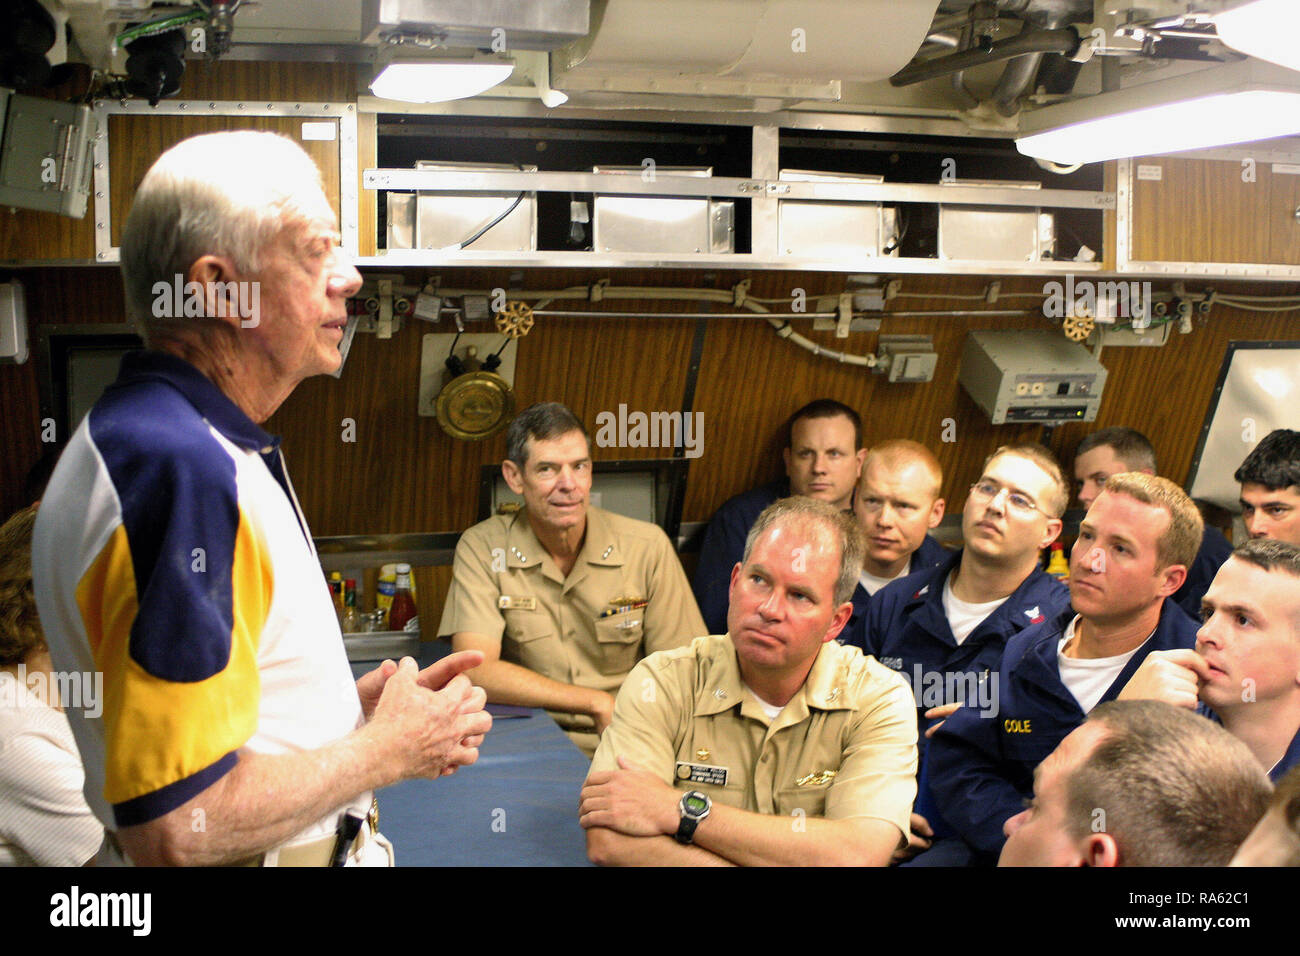 2005 - Former US President James E. Carter addresses the crew onboard his namesake ship, the Sea Wolf Class Attack Submarine USS JIMMY CARTER (SSN 23) in the crew's mess. President Carter and his wife, Rosalynn, spent the night aboard the submarine, touring the ship and meeting with crew members. The USS JIMMY CARTER is the third in Sea Wolf Class Attack Submarine. Stock Photo